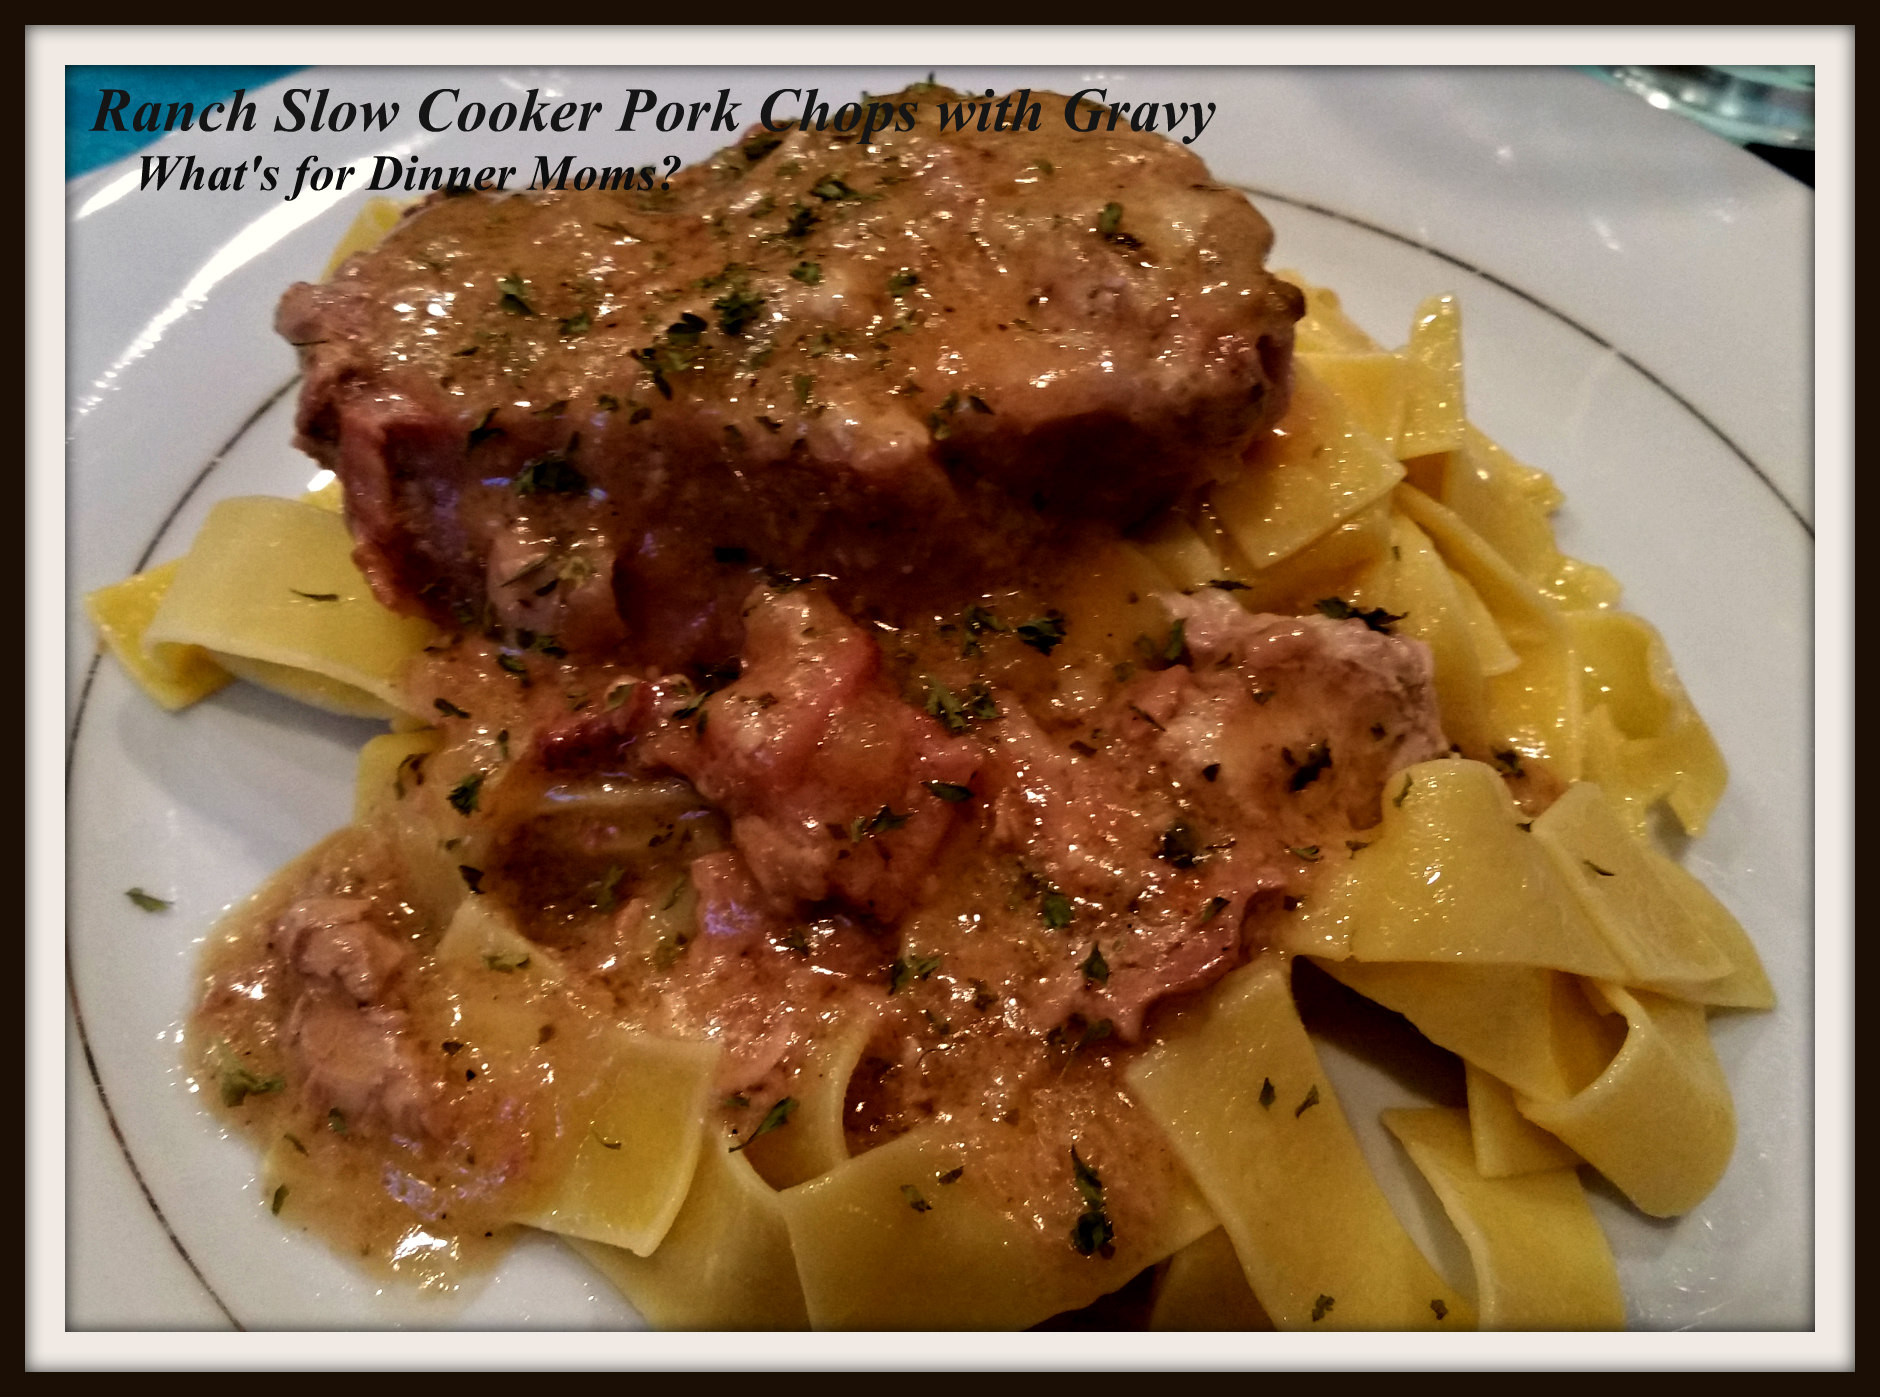 Pork Chops In Slow Cooker Recipes
 Ranch Slow Cooker Pork Chops with Gravy No Canned Soups